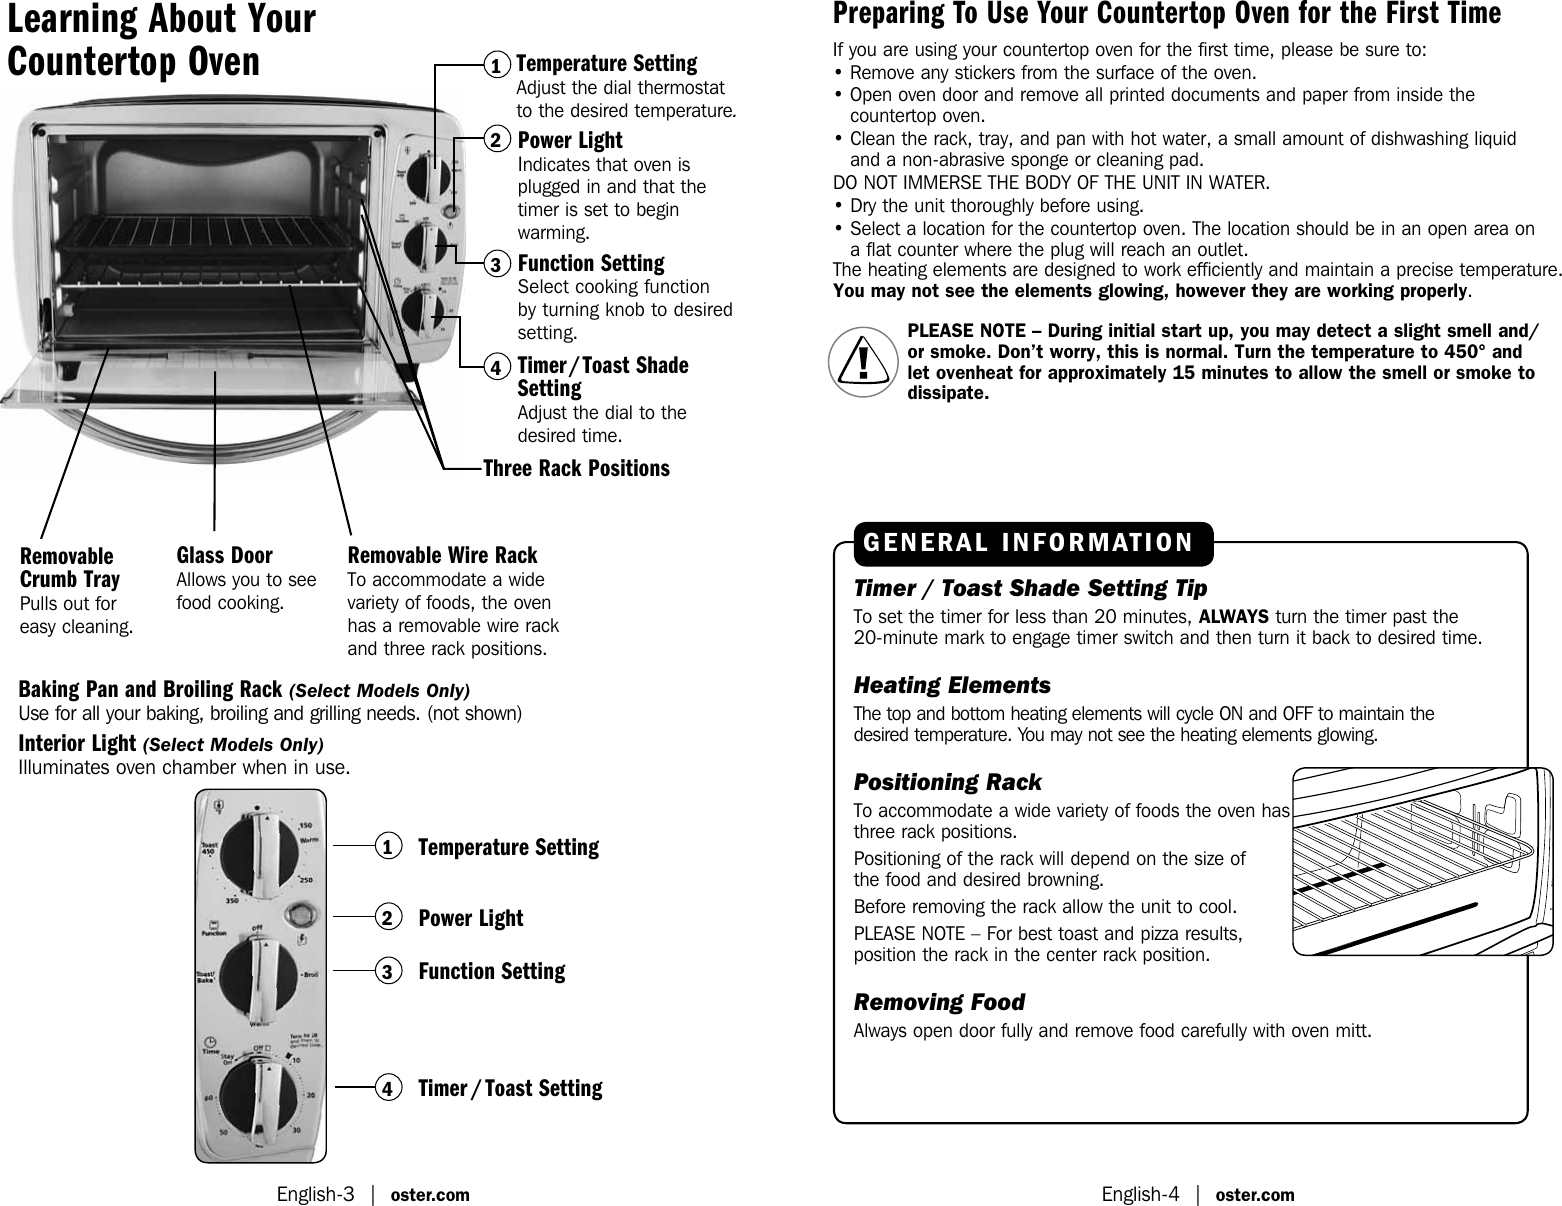 Page 3 of 11 - Oster Oster-Tssttv0000-Oster-Stainless-Steel-6-Slice-Toaster-Oven-Instruction-Manual-  Oster-tssttv0000-oster-stainless-steel-6-slice-toaster-oven-instruction-manual